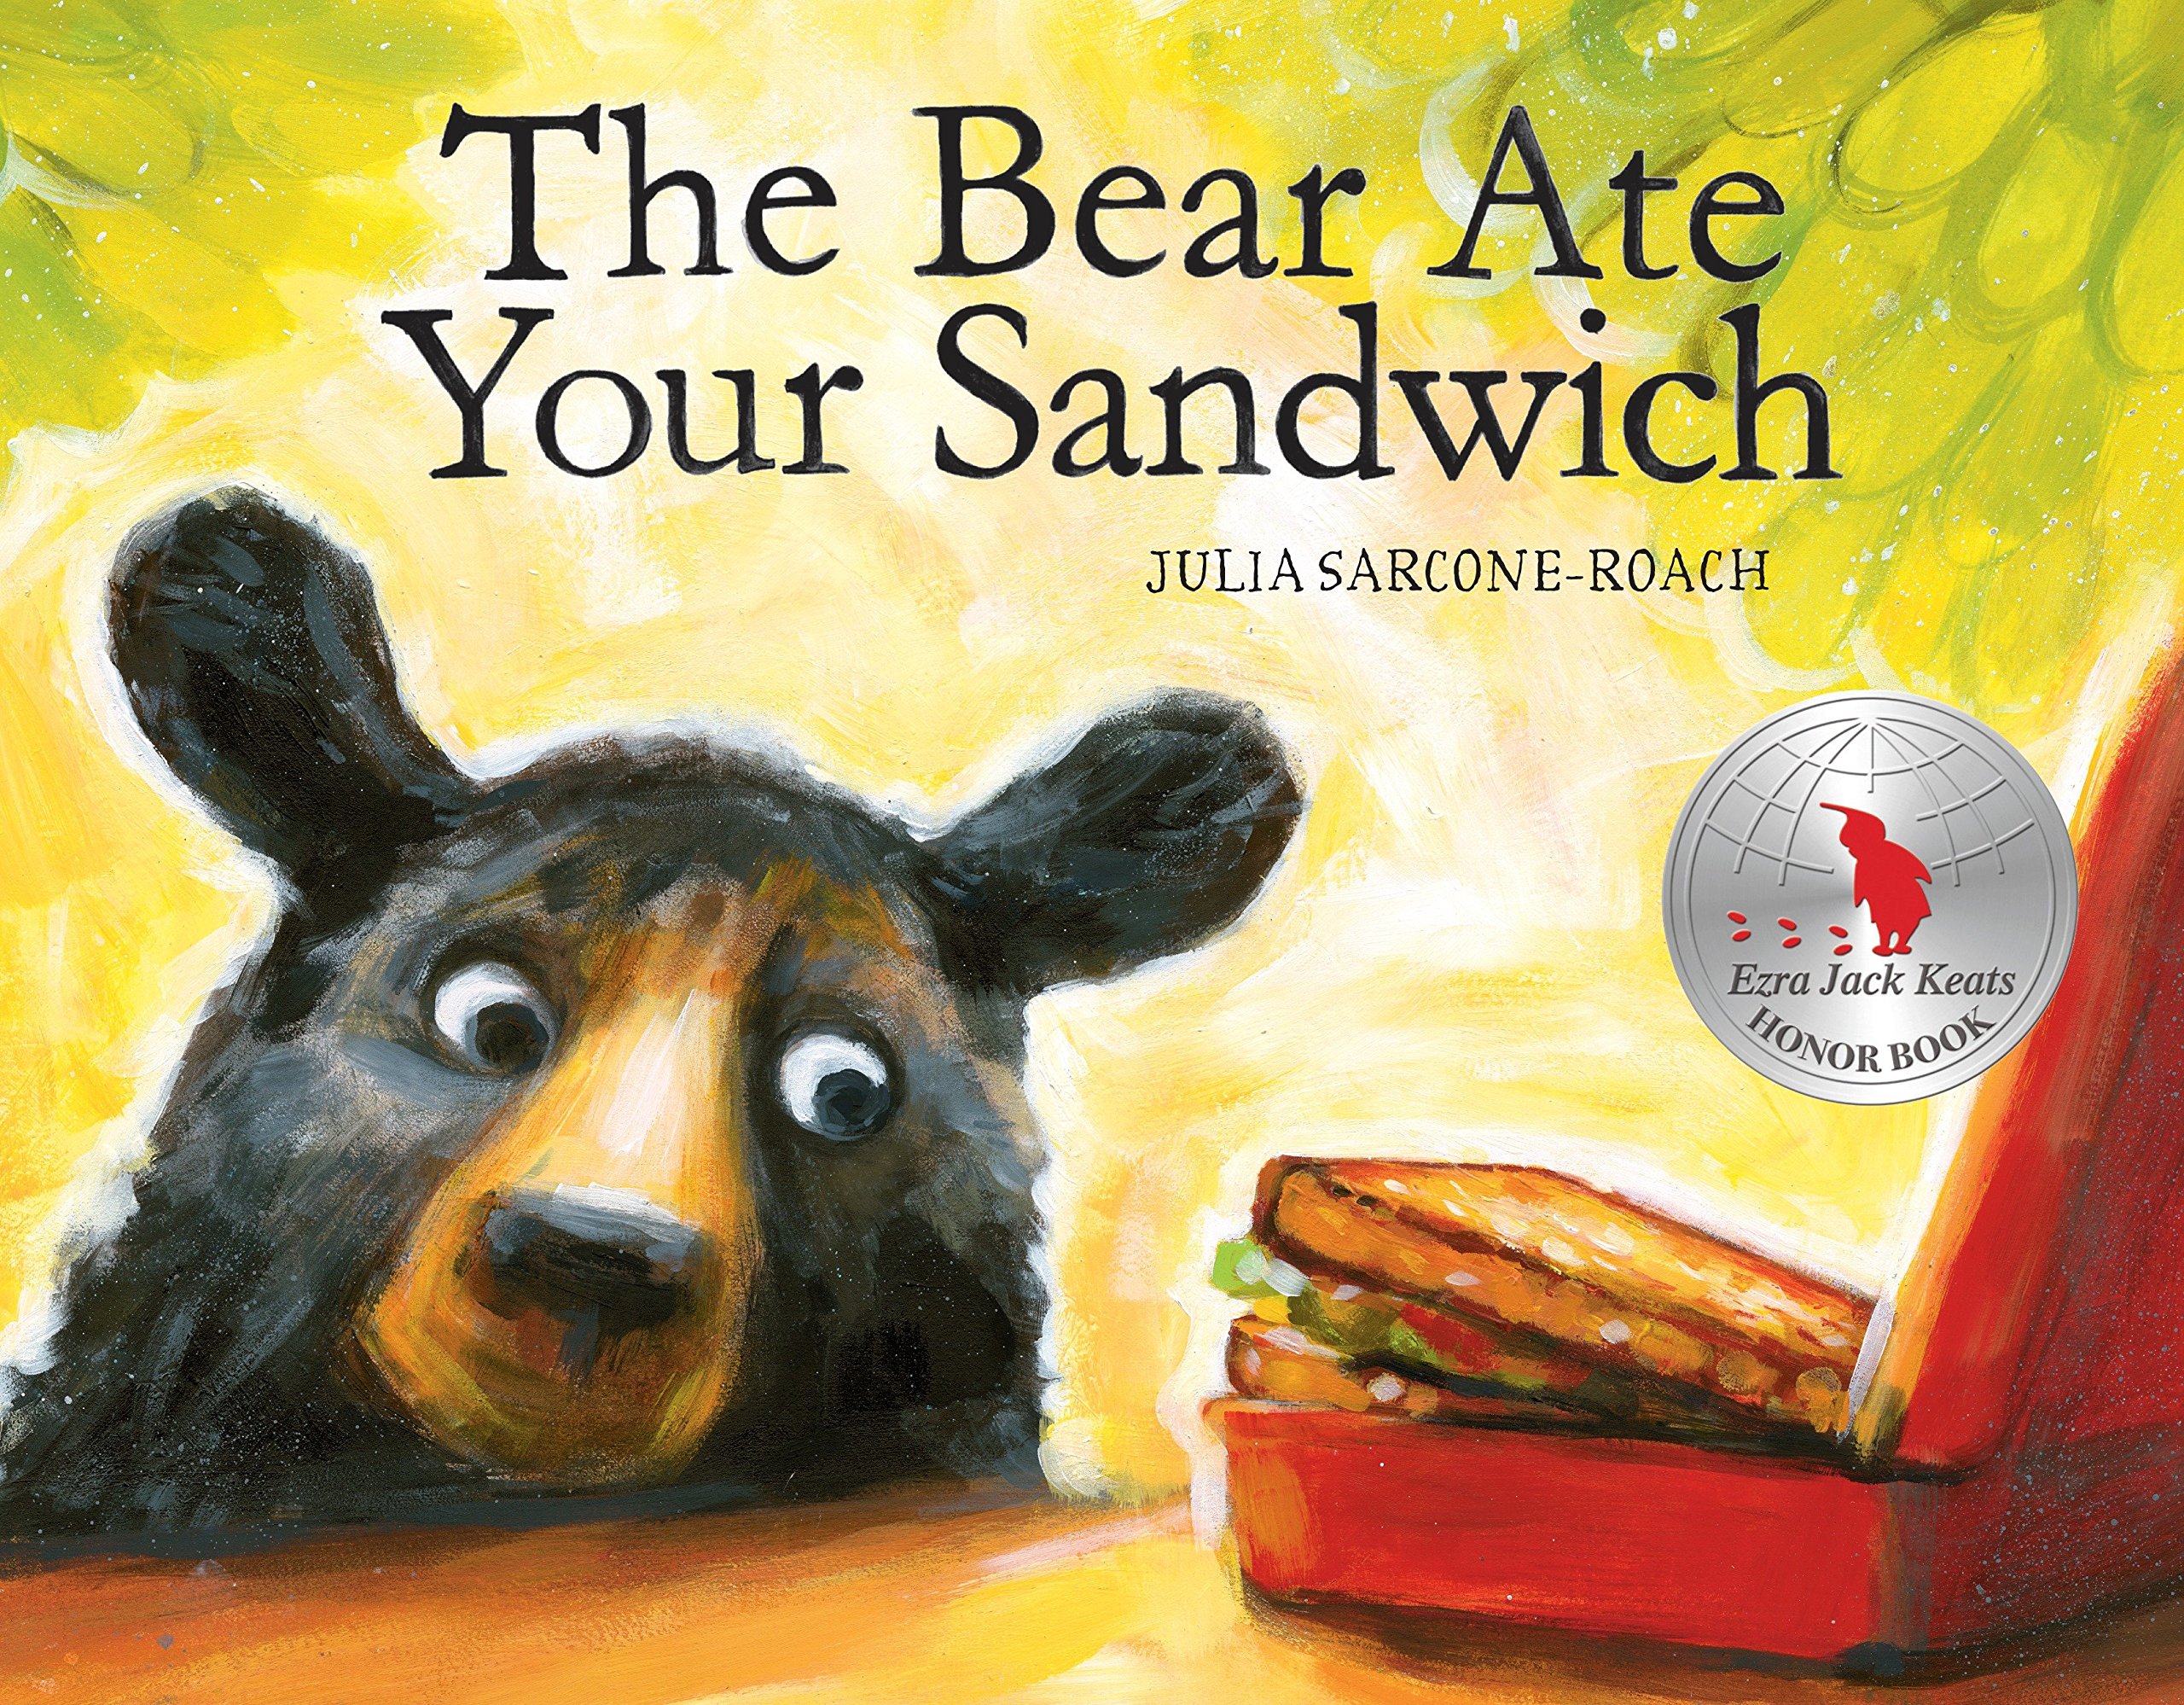 The cover for the book The Bear Ate Your Sandwich